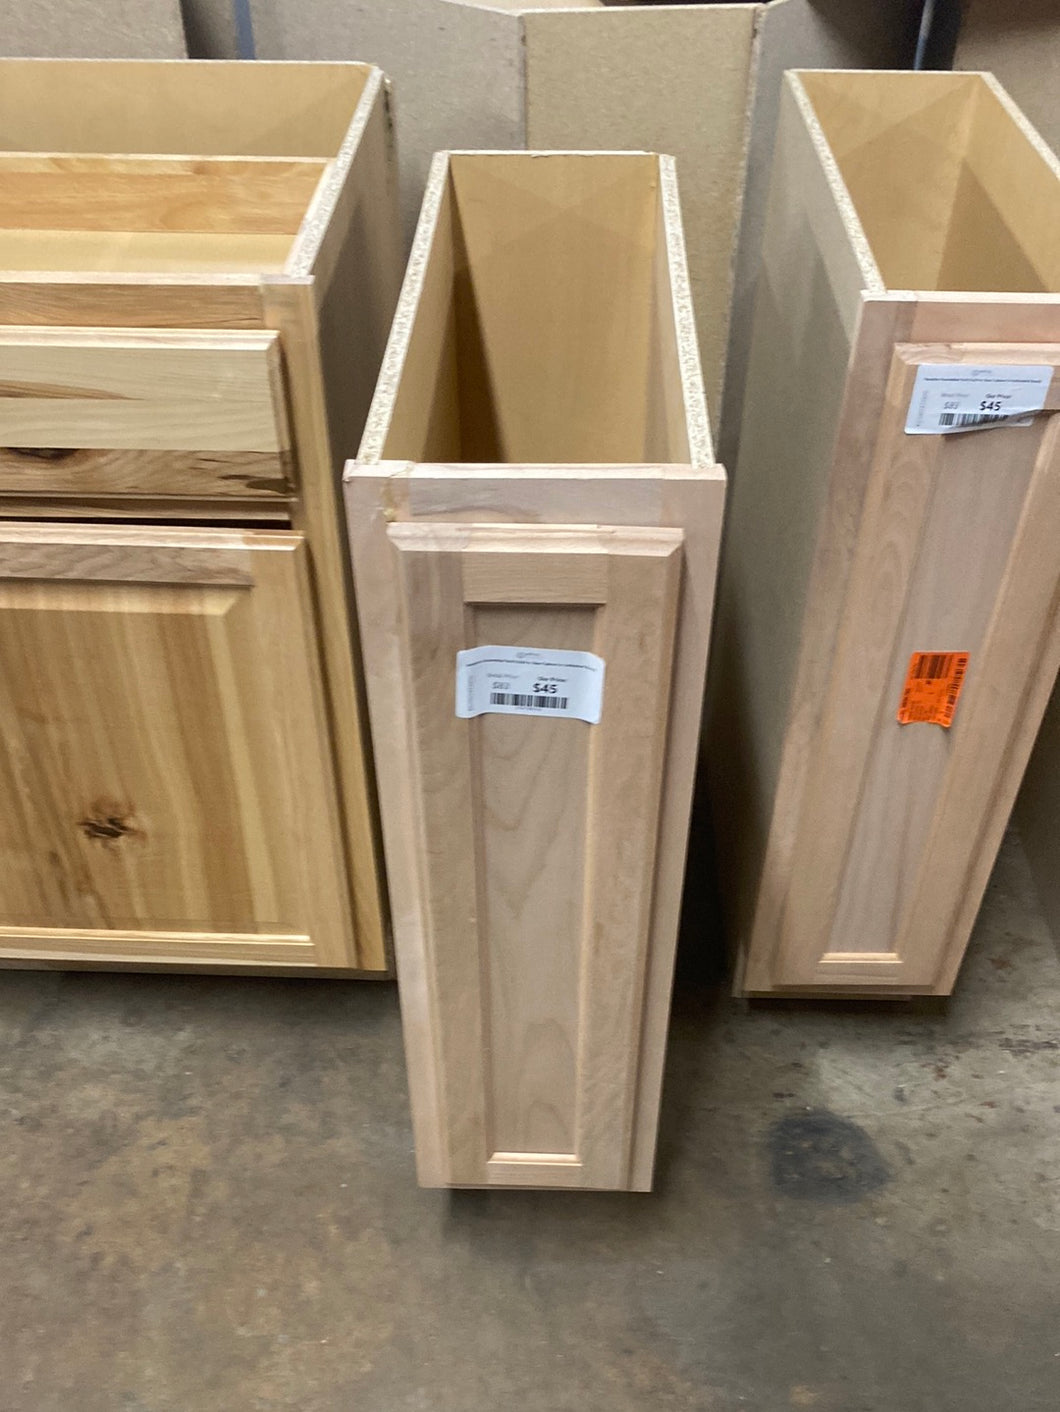 Hampton Assembled 9x34.5x24 in. Base Cabinet in Unfinished Beech